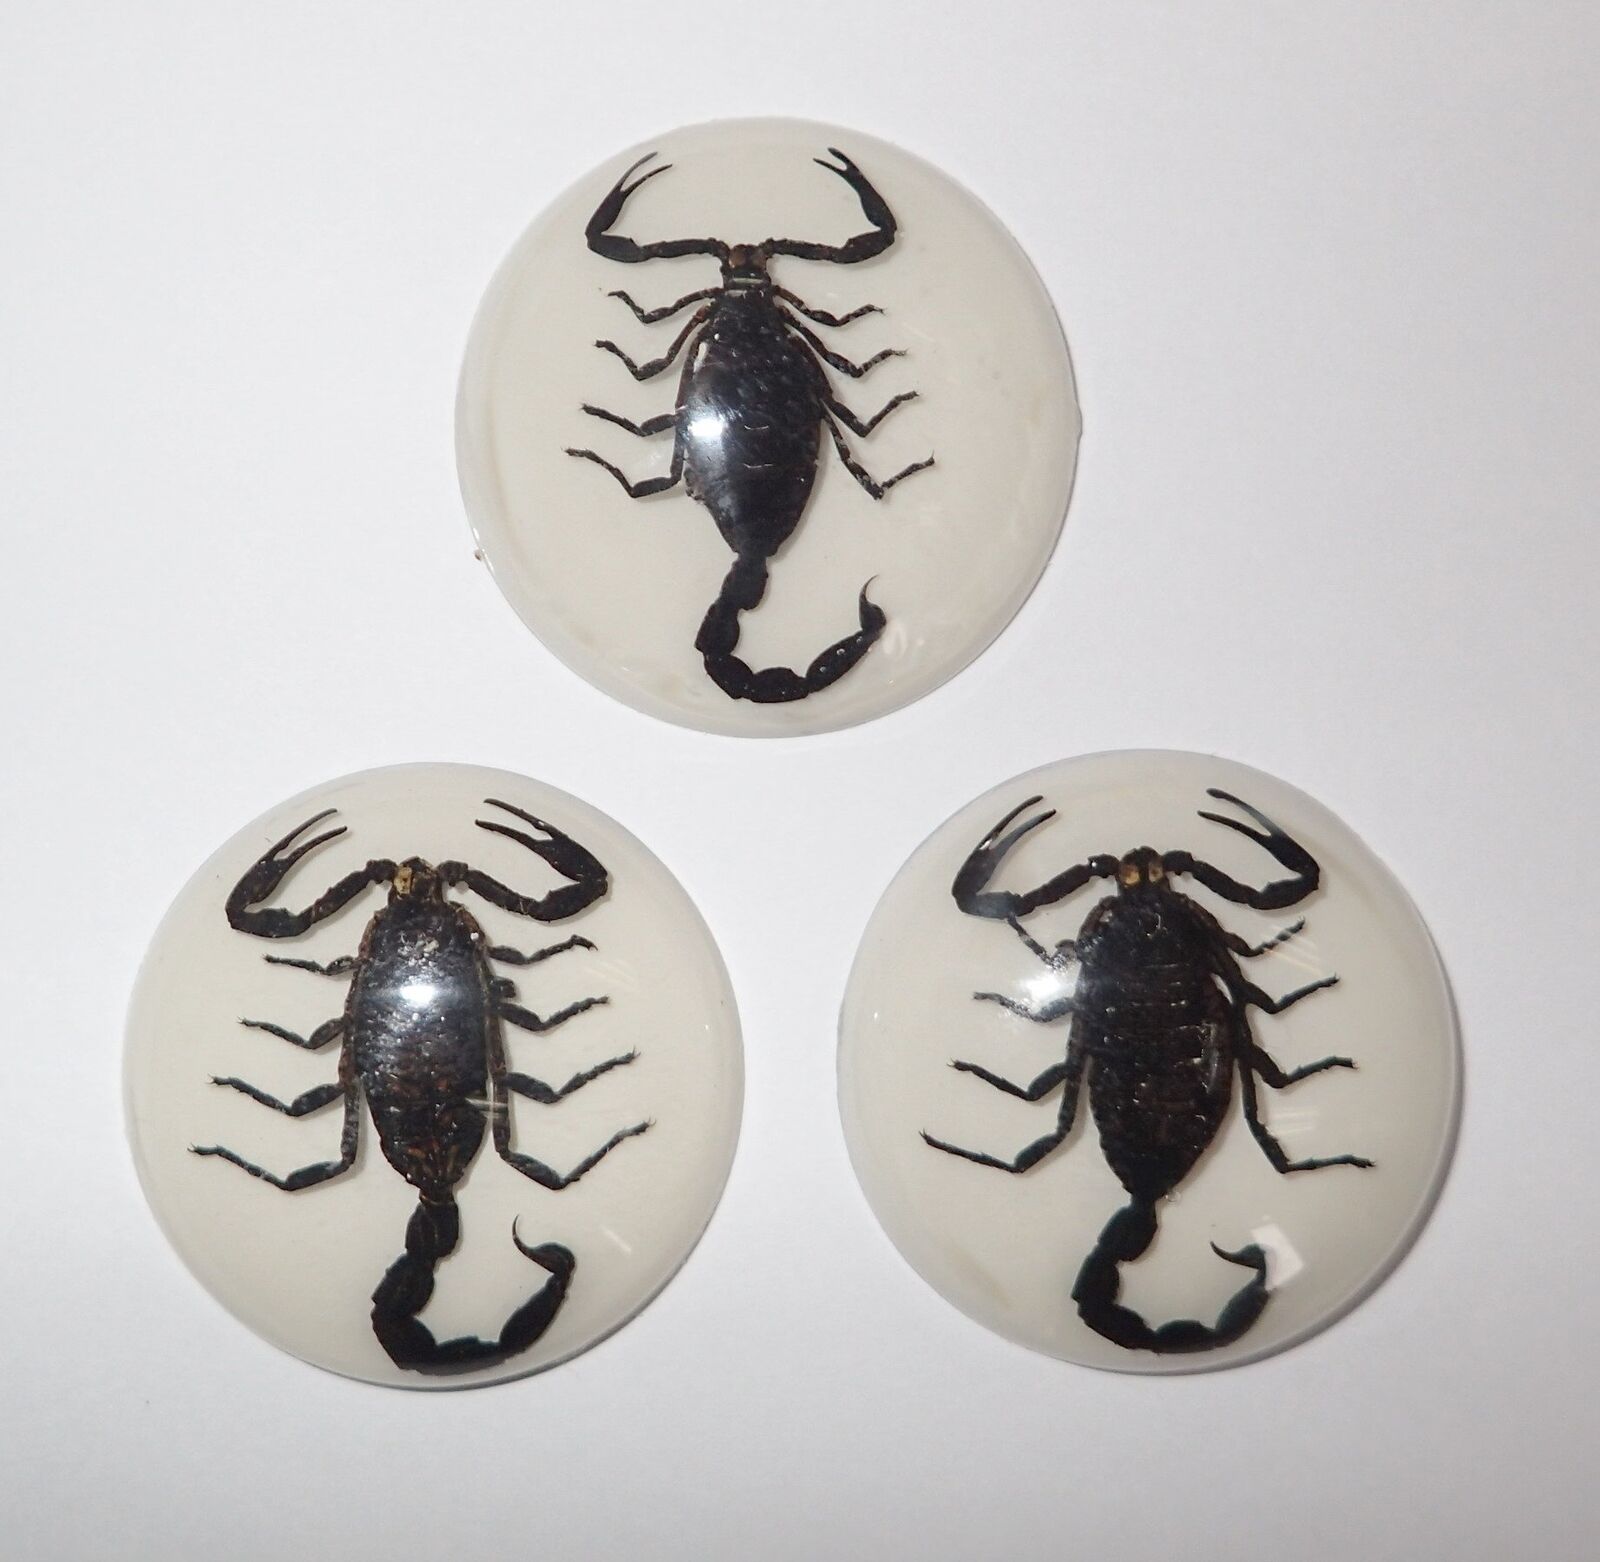 Insect Cabochon Black Scorpion 35 mm Round on White Bottom 3 pieces Lot